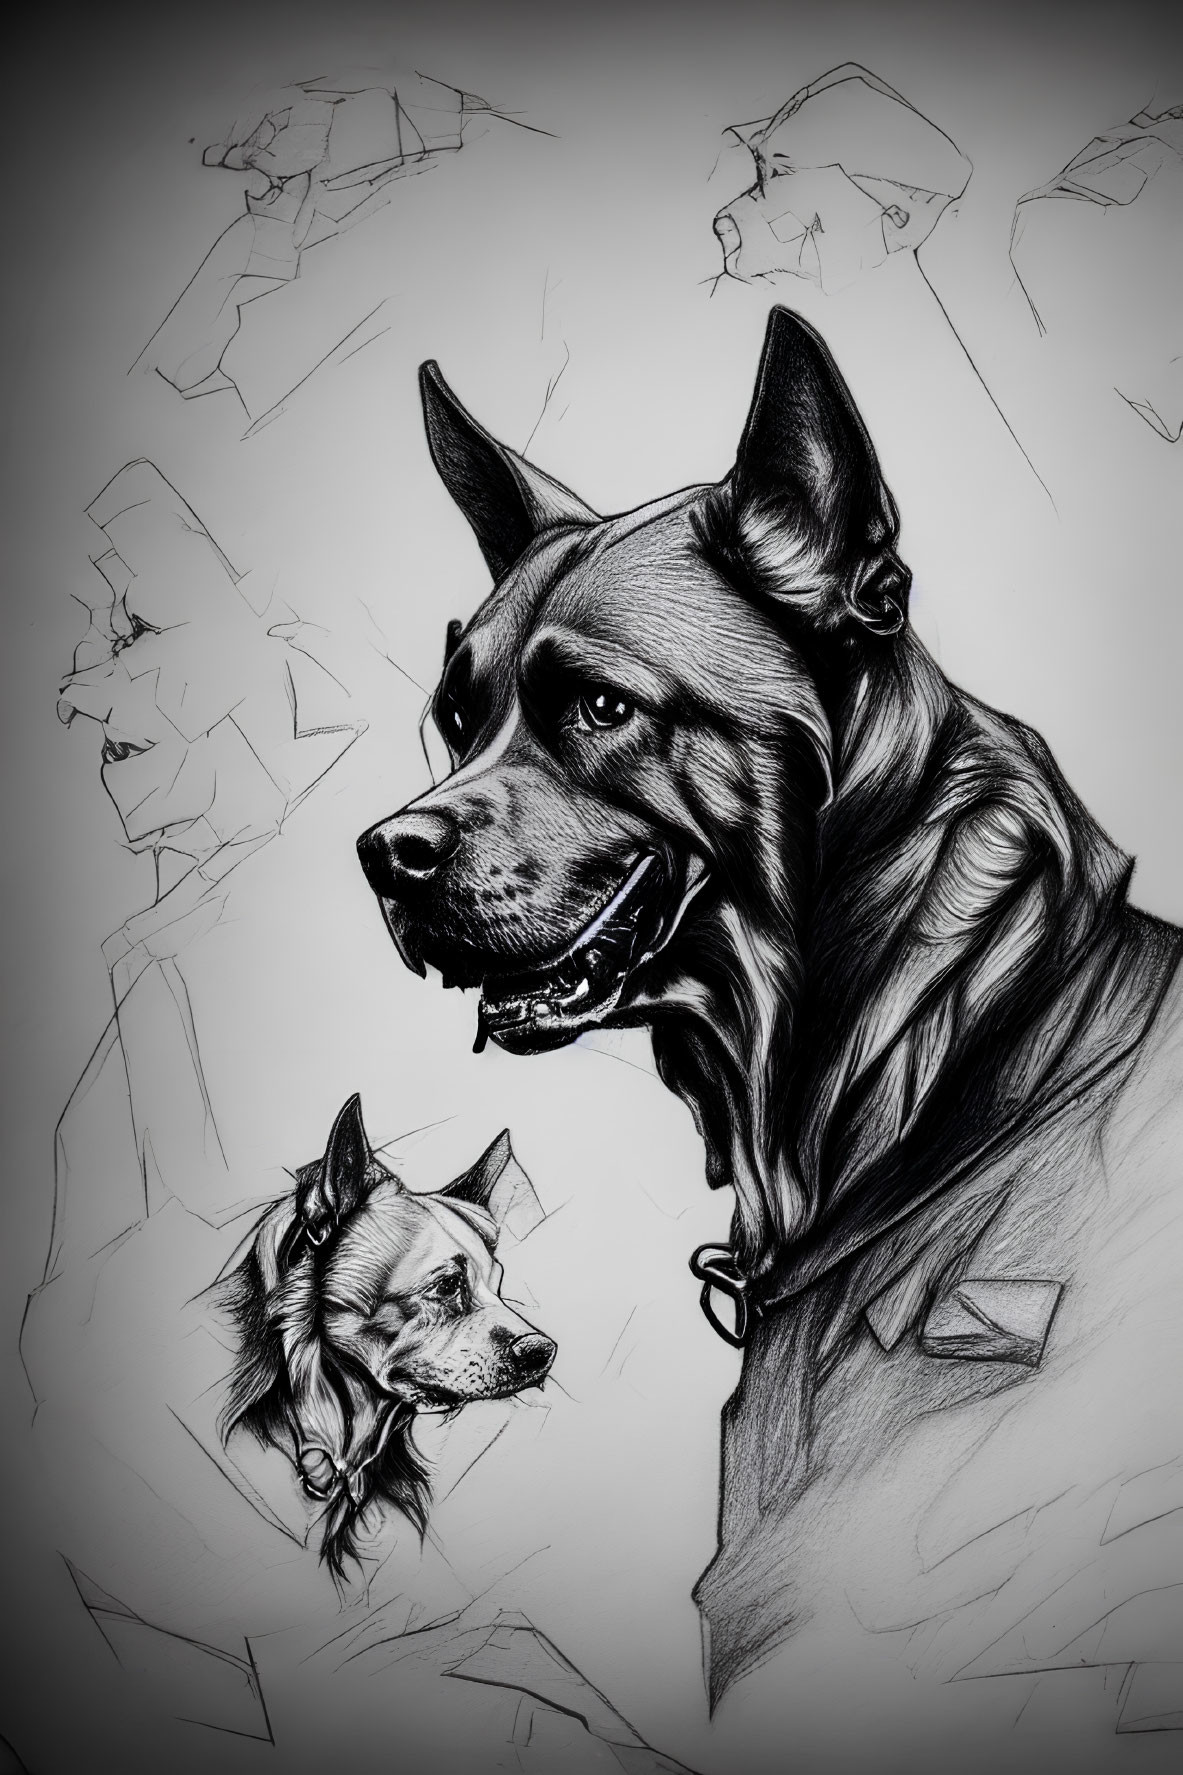 Detailed black and white sketch of two dogs in varied line drawings